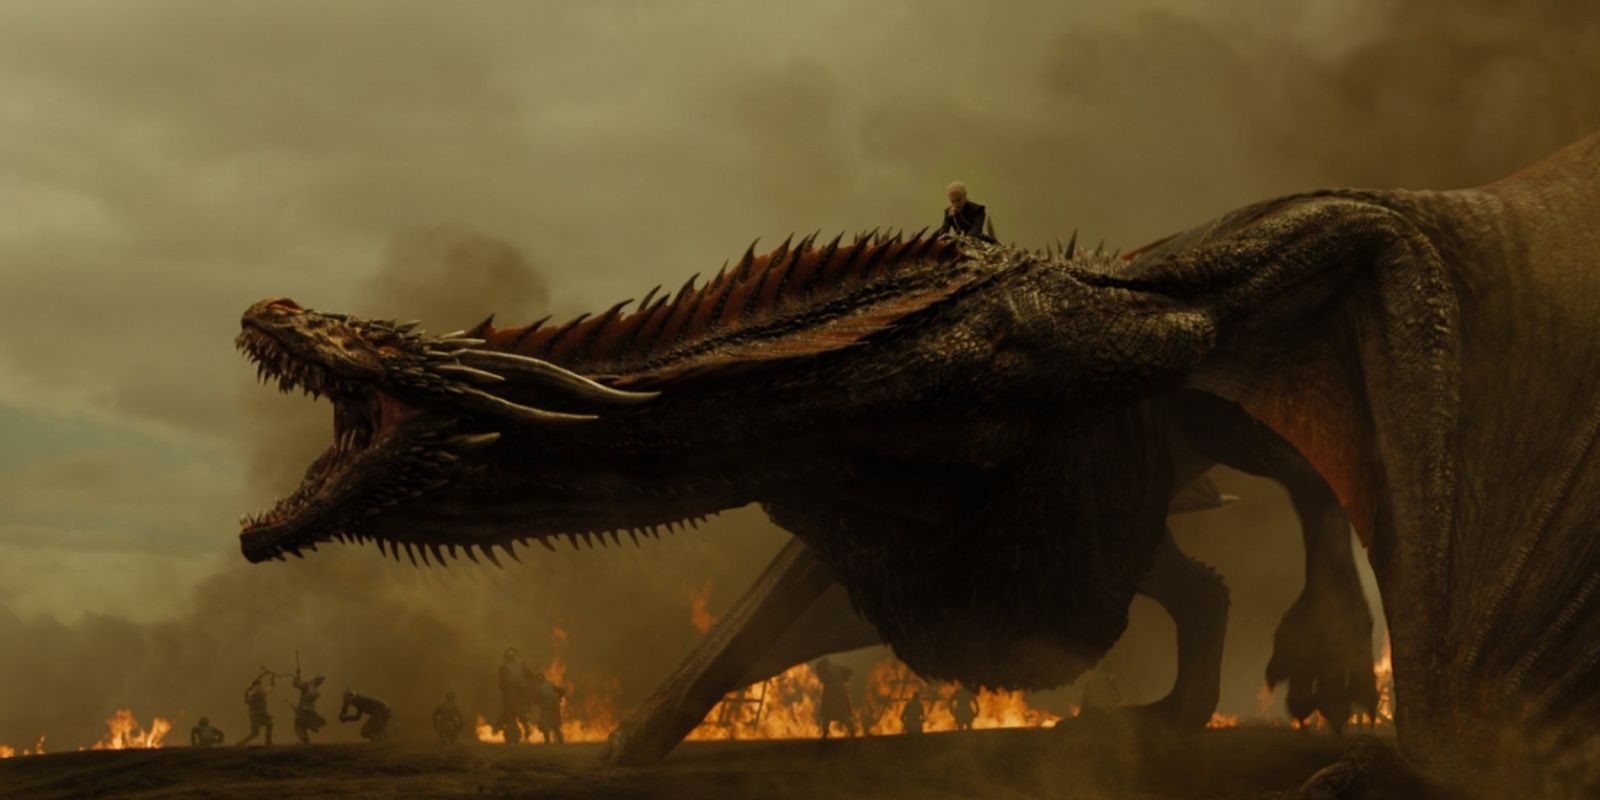 Daenerys riding Drogon in battle against the Lannister army